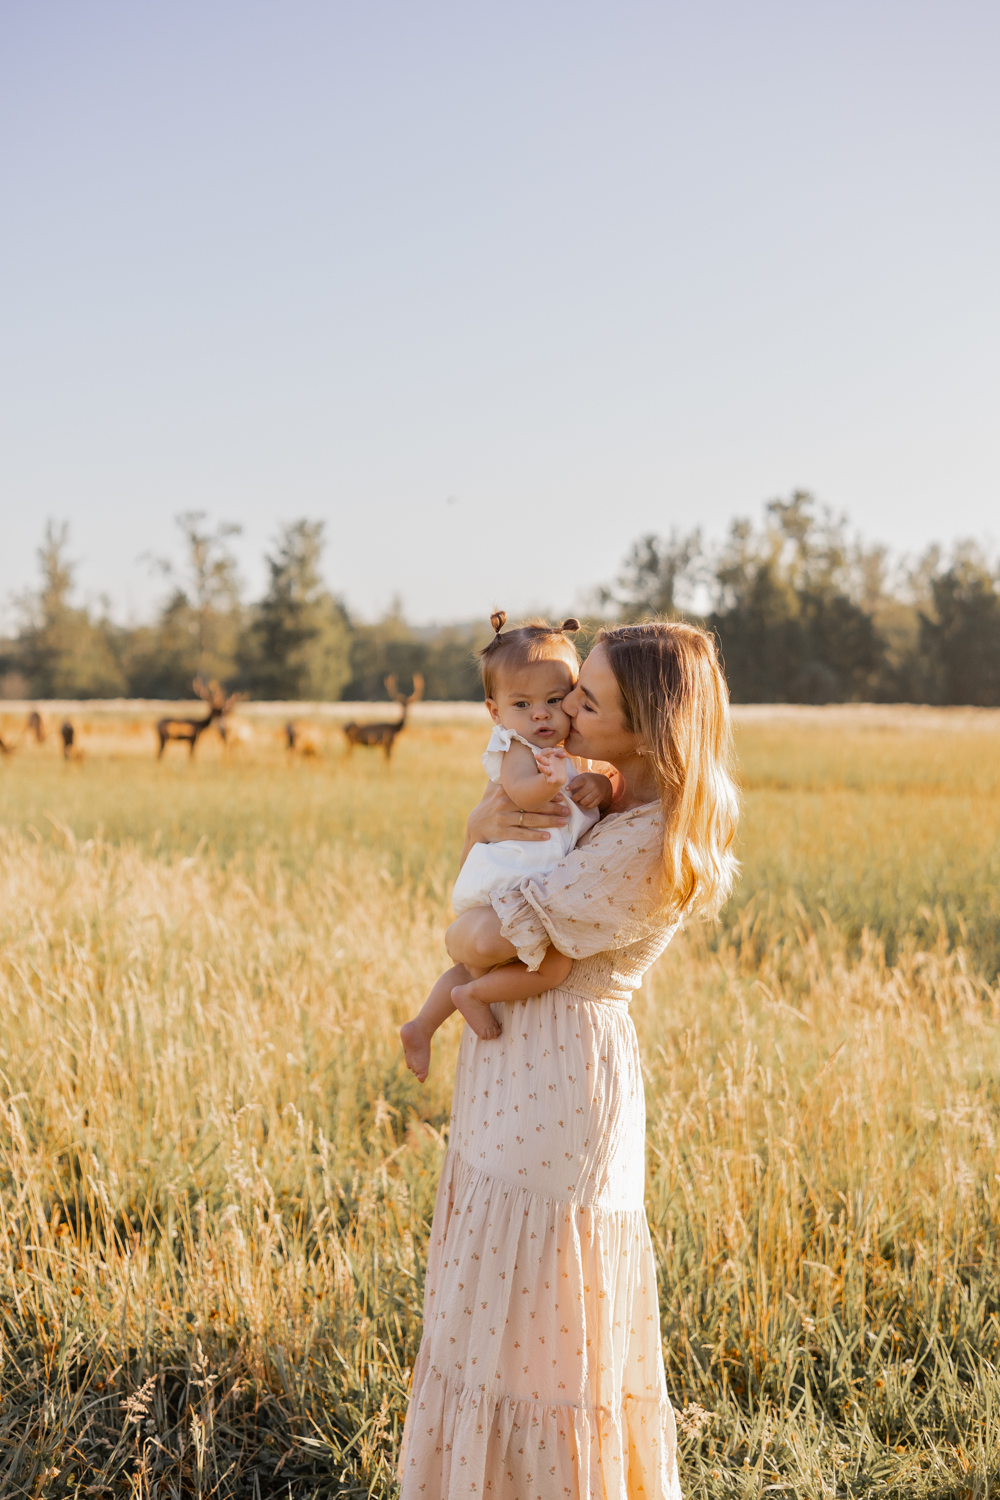 motherhood photography session captures mom and baby girl in a field in the PNW with Elk